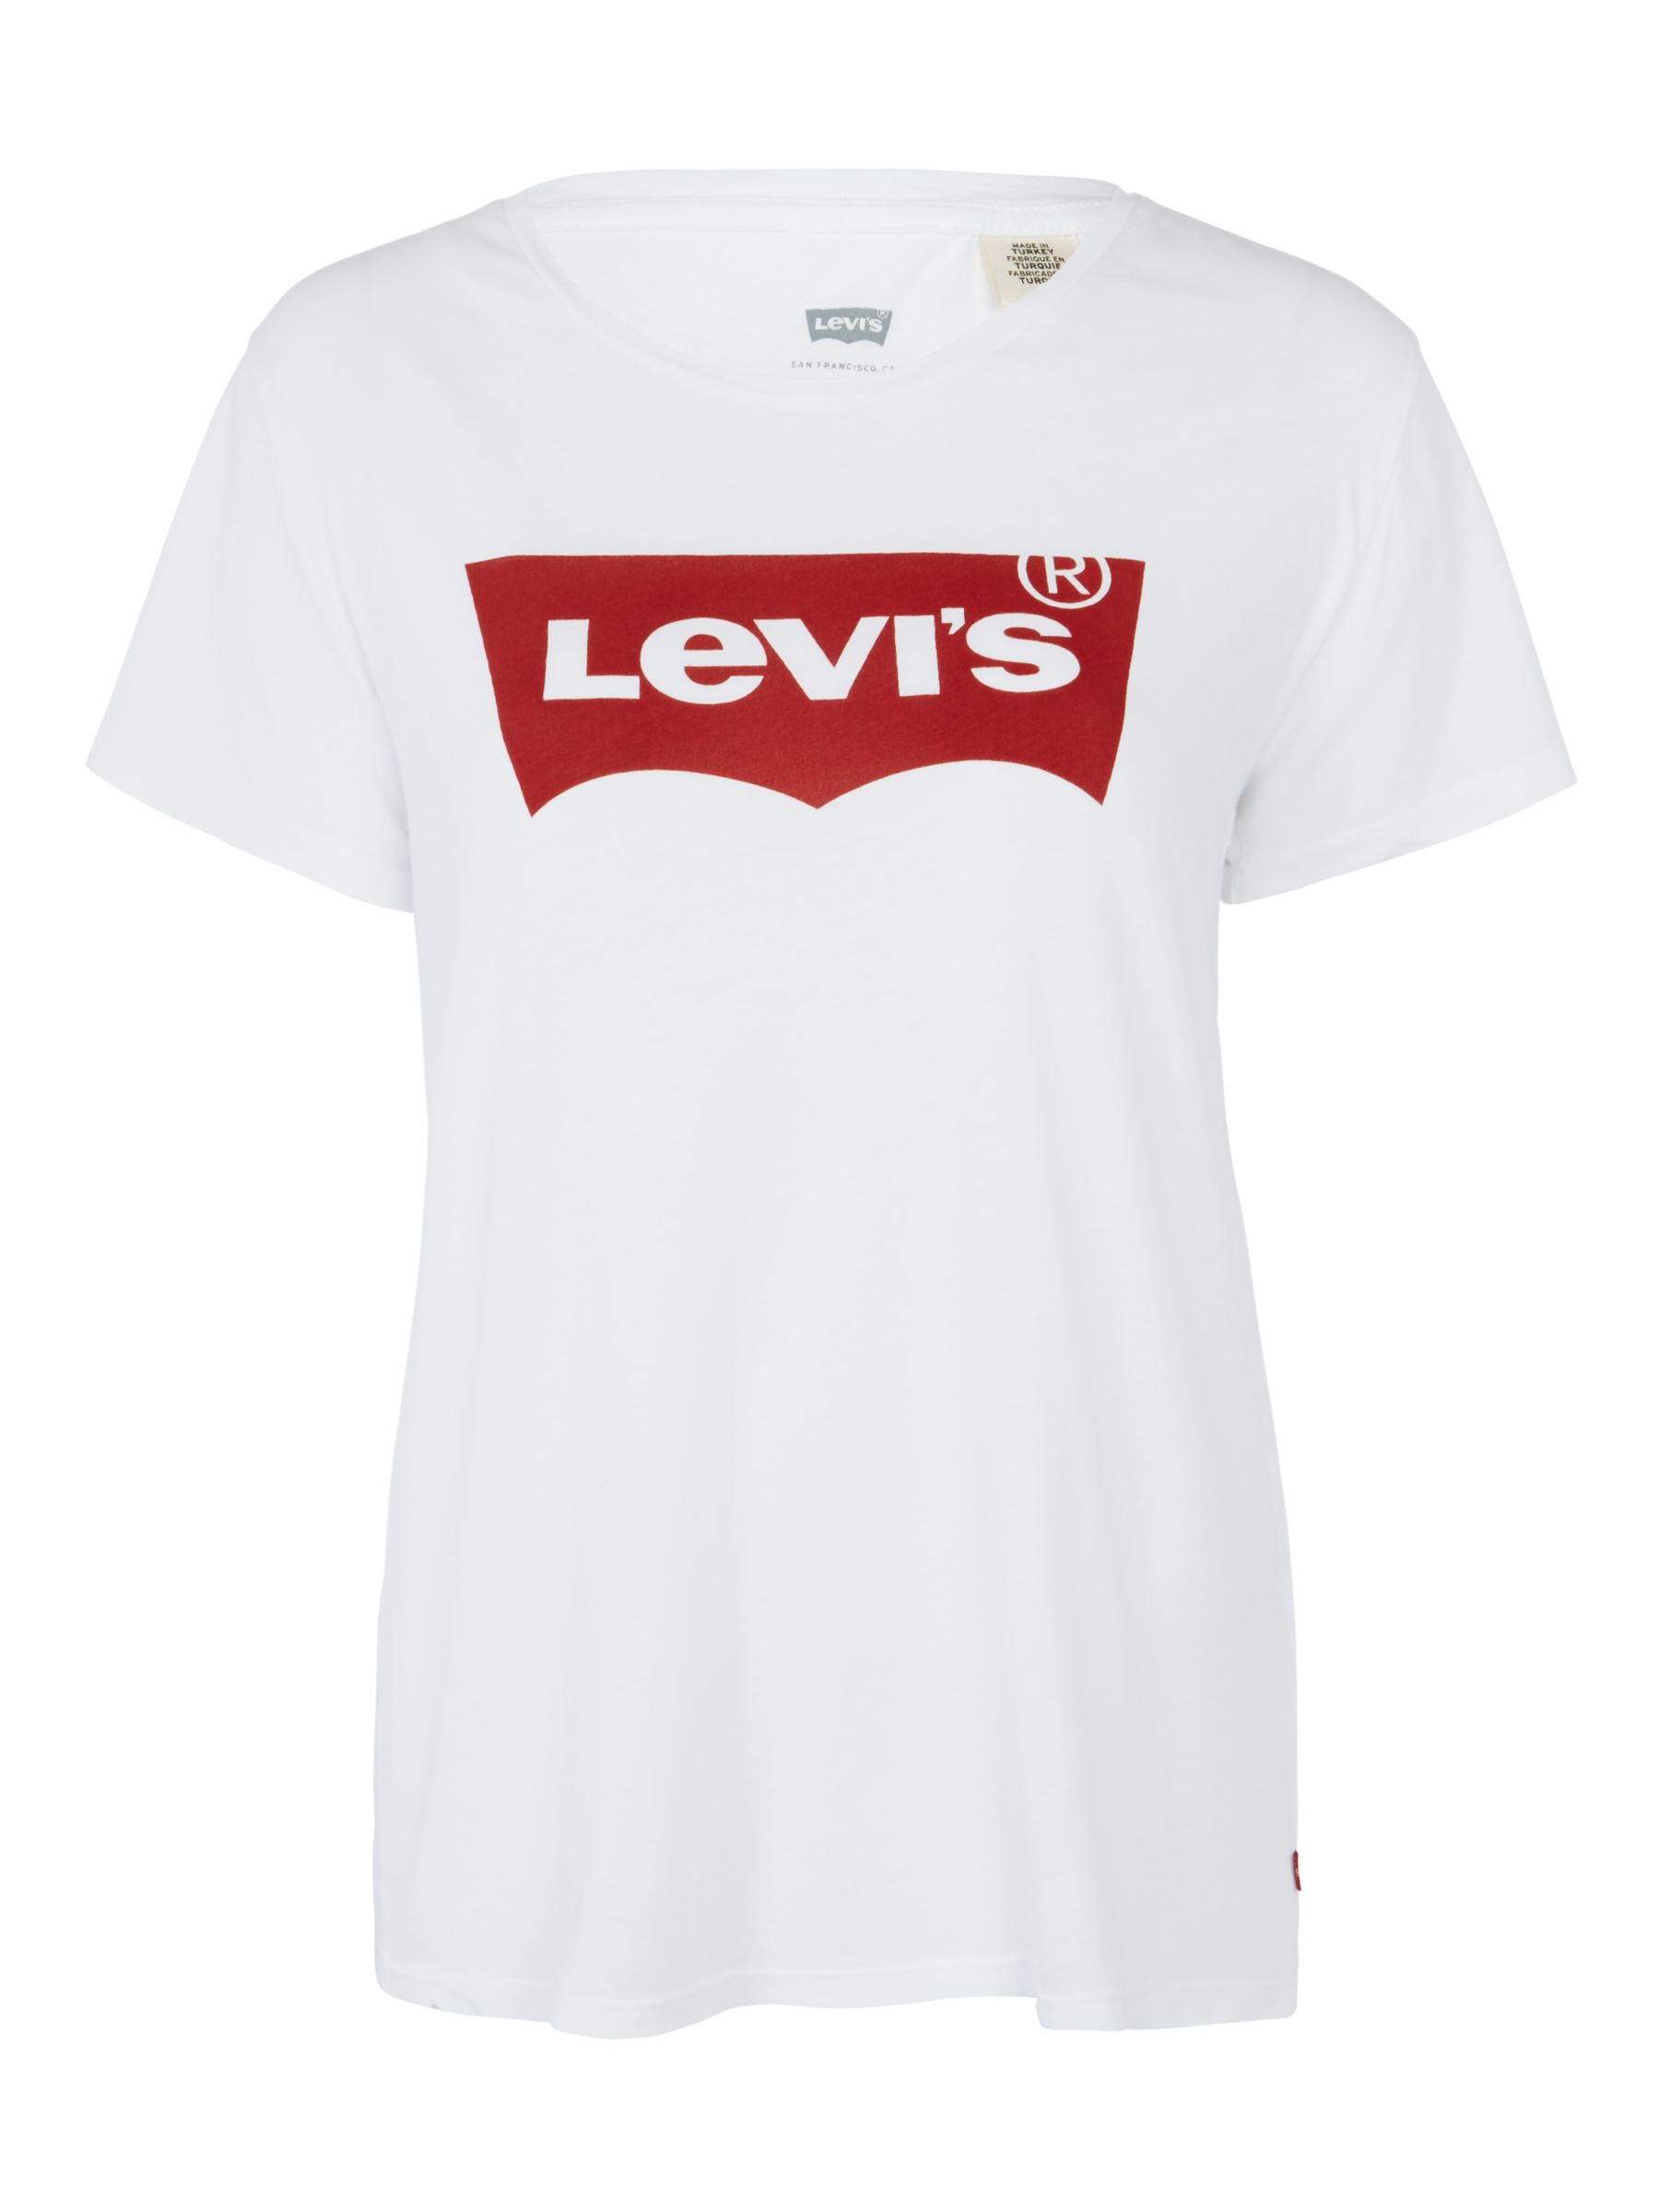 Introducir 64+ imagen levi’s white t shirt with red logo